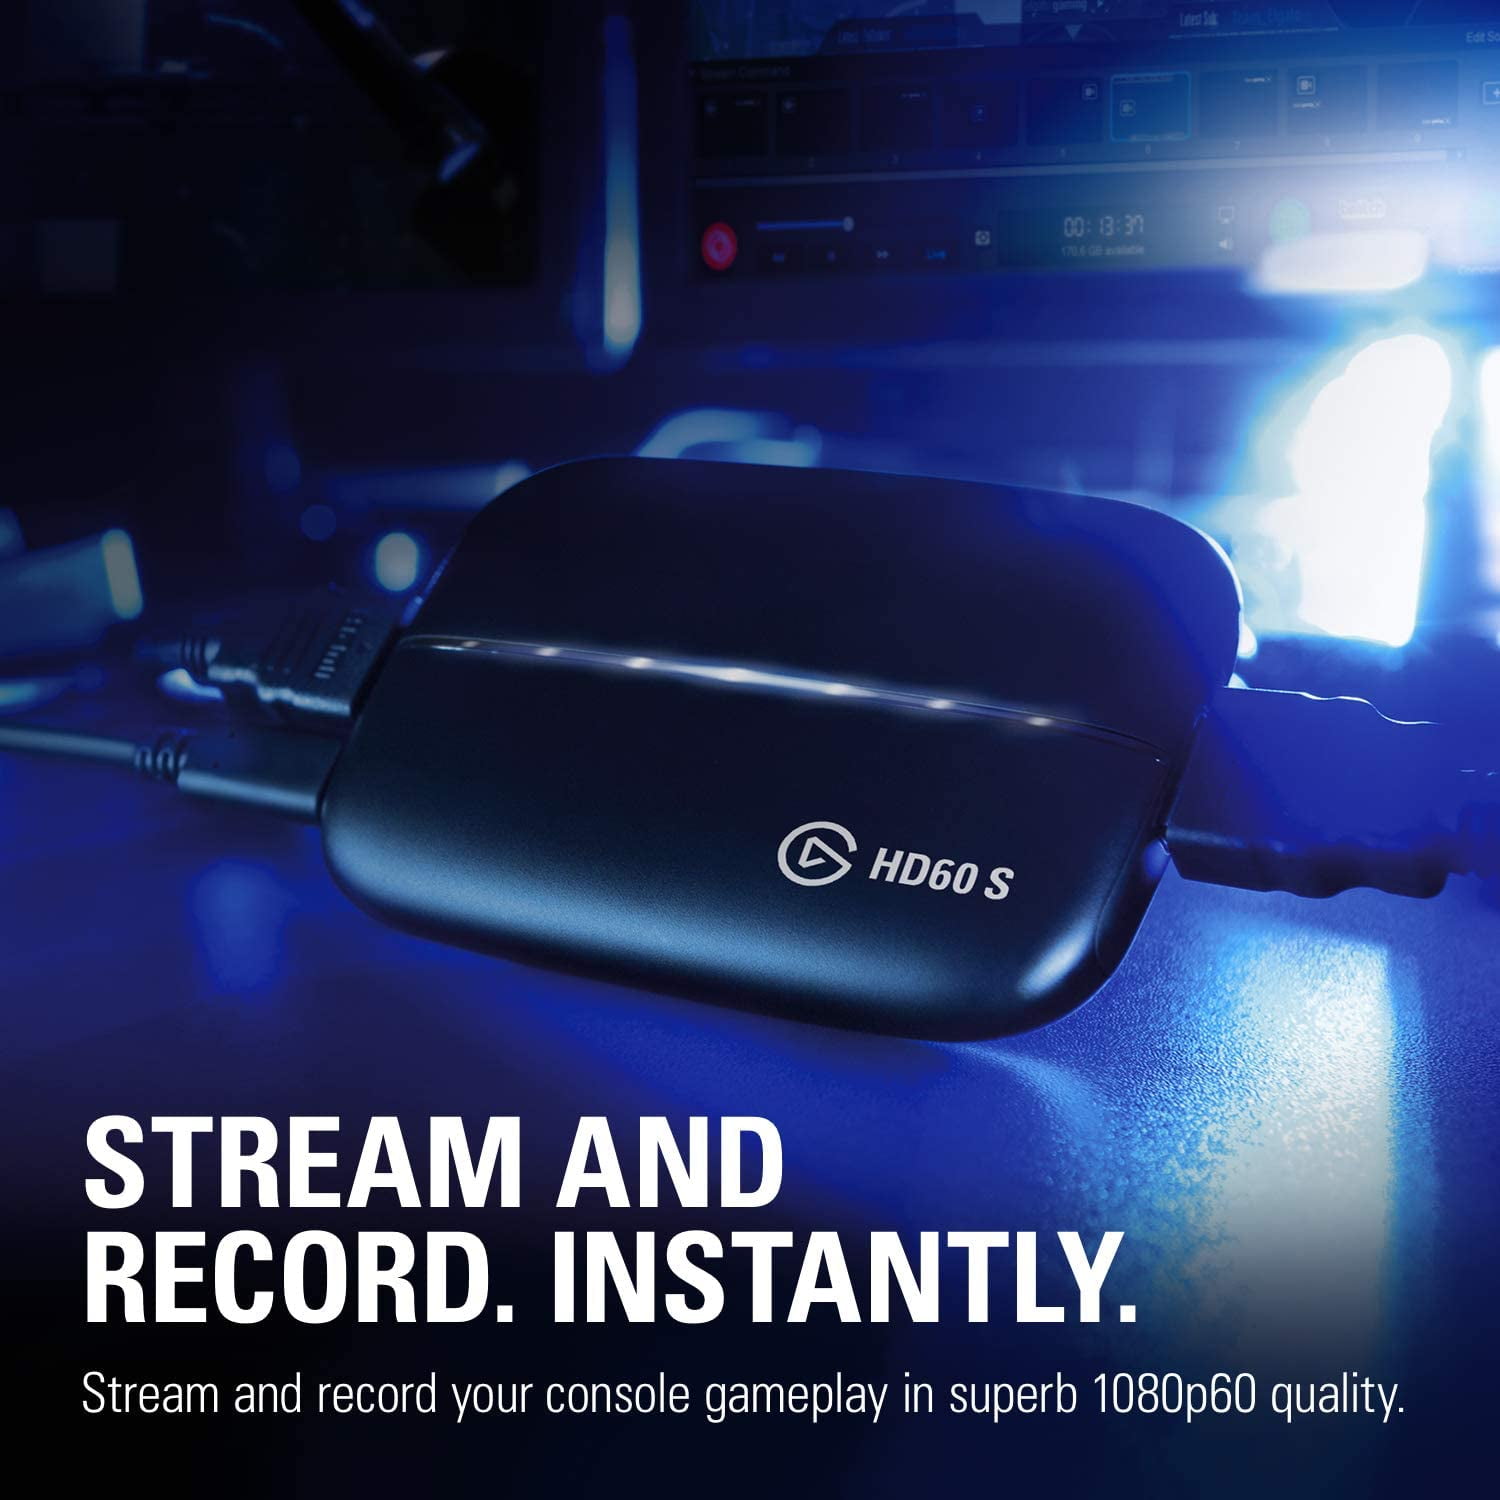 Elgato Game Capture HD60 S - stream, record and share your